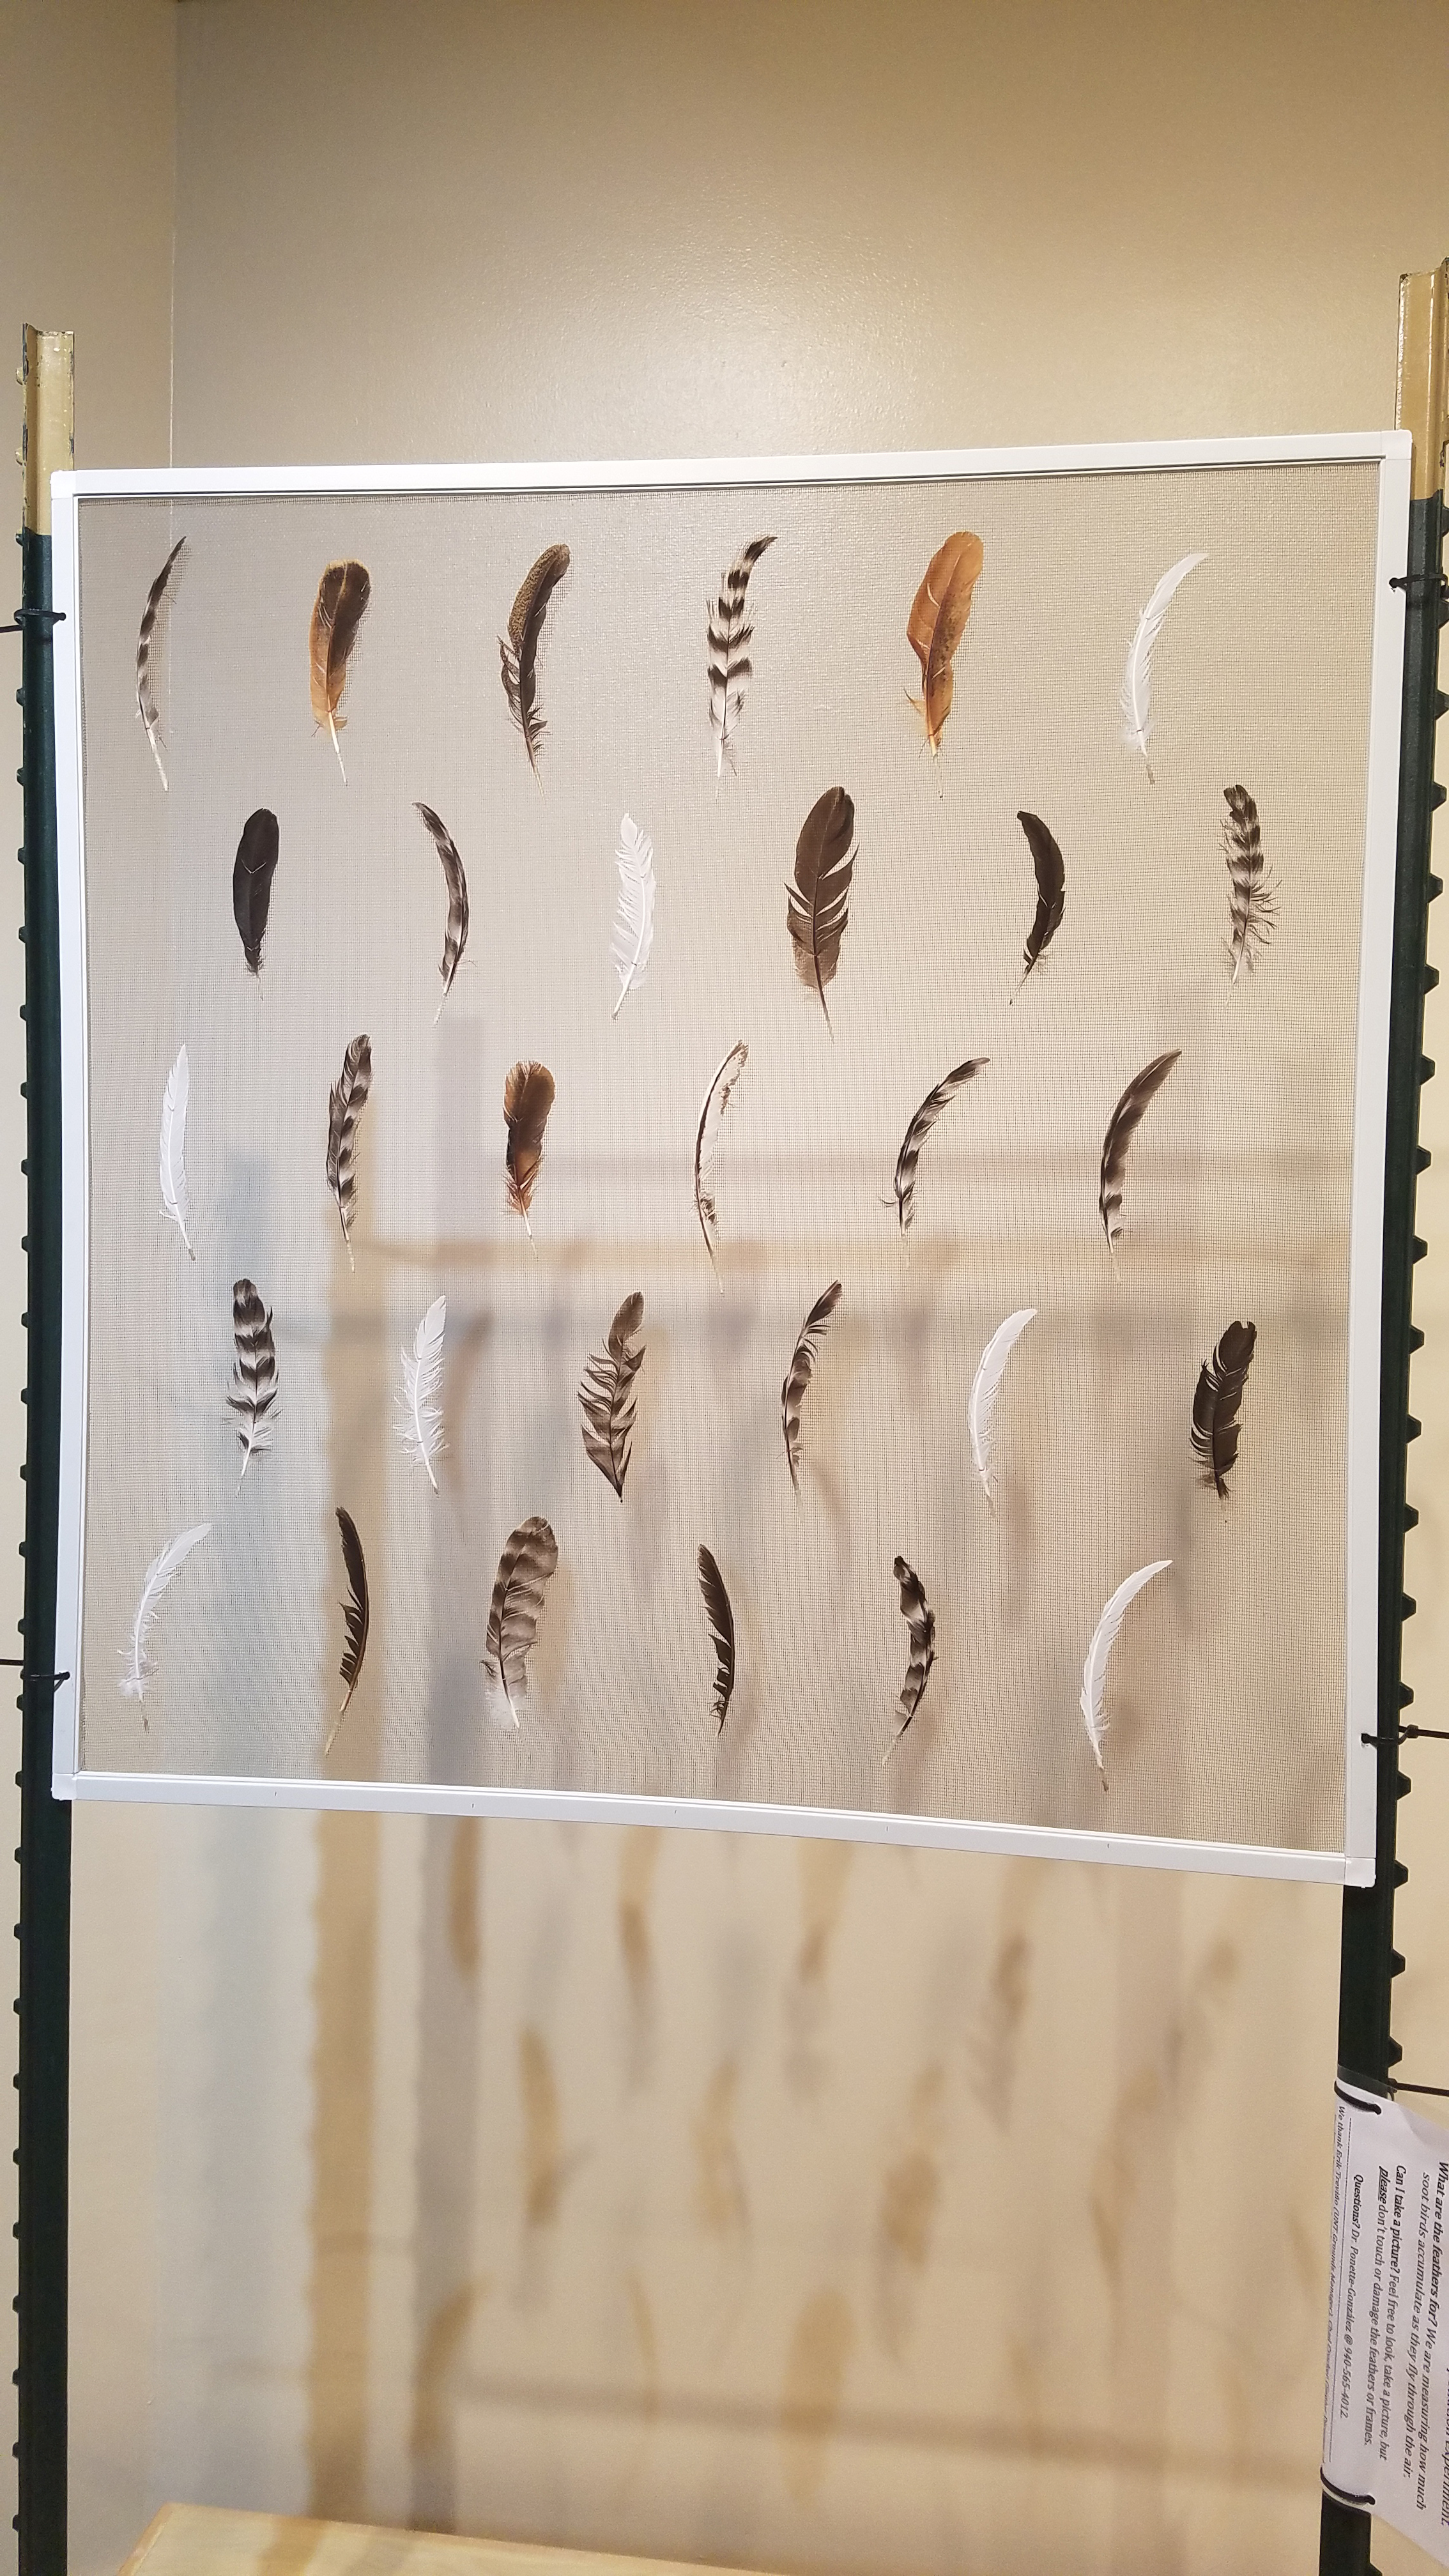 Art meets science: UNT students and faculty combine their talents  to find out what bird feathers reveal about air quality 